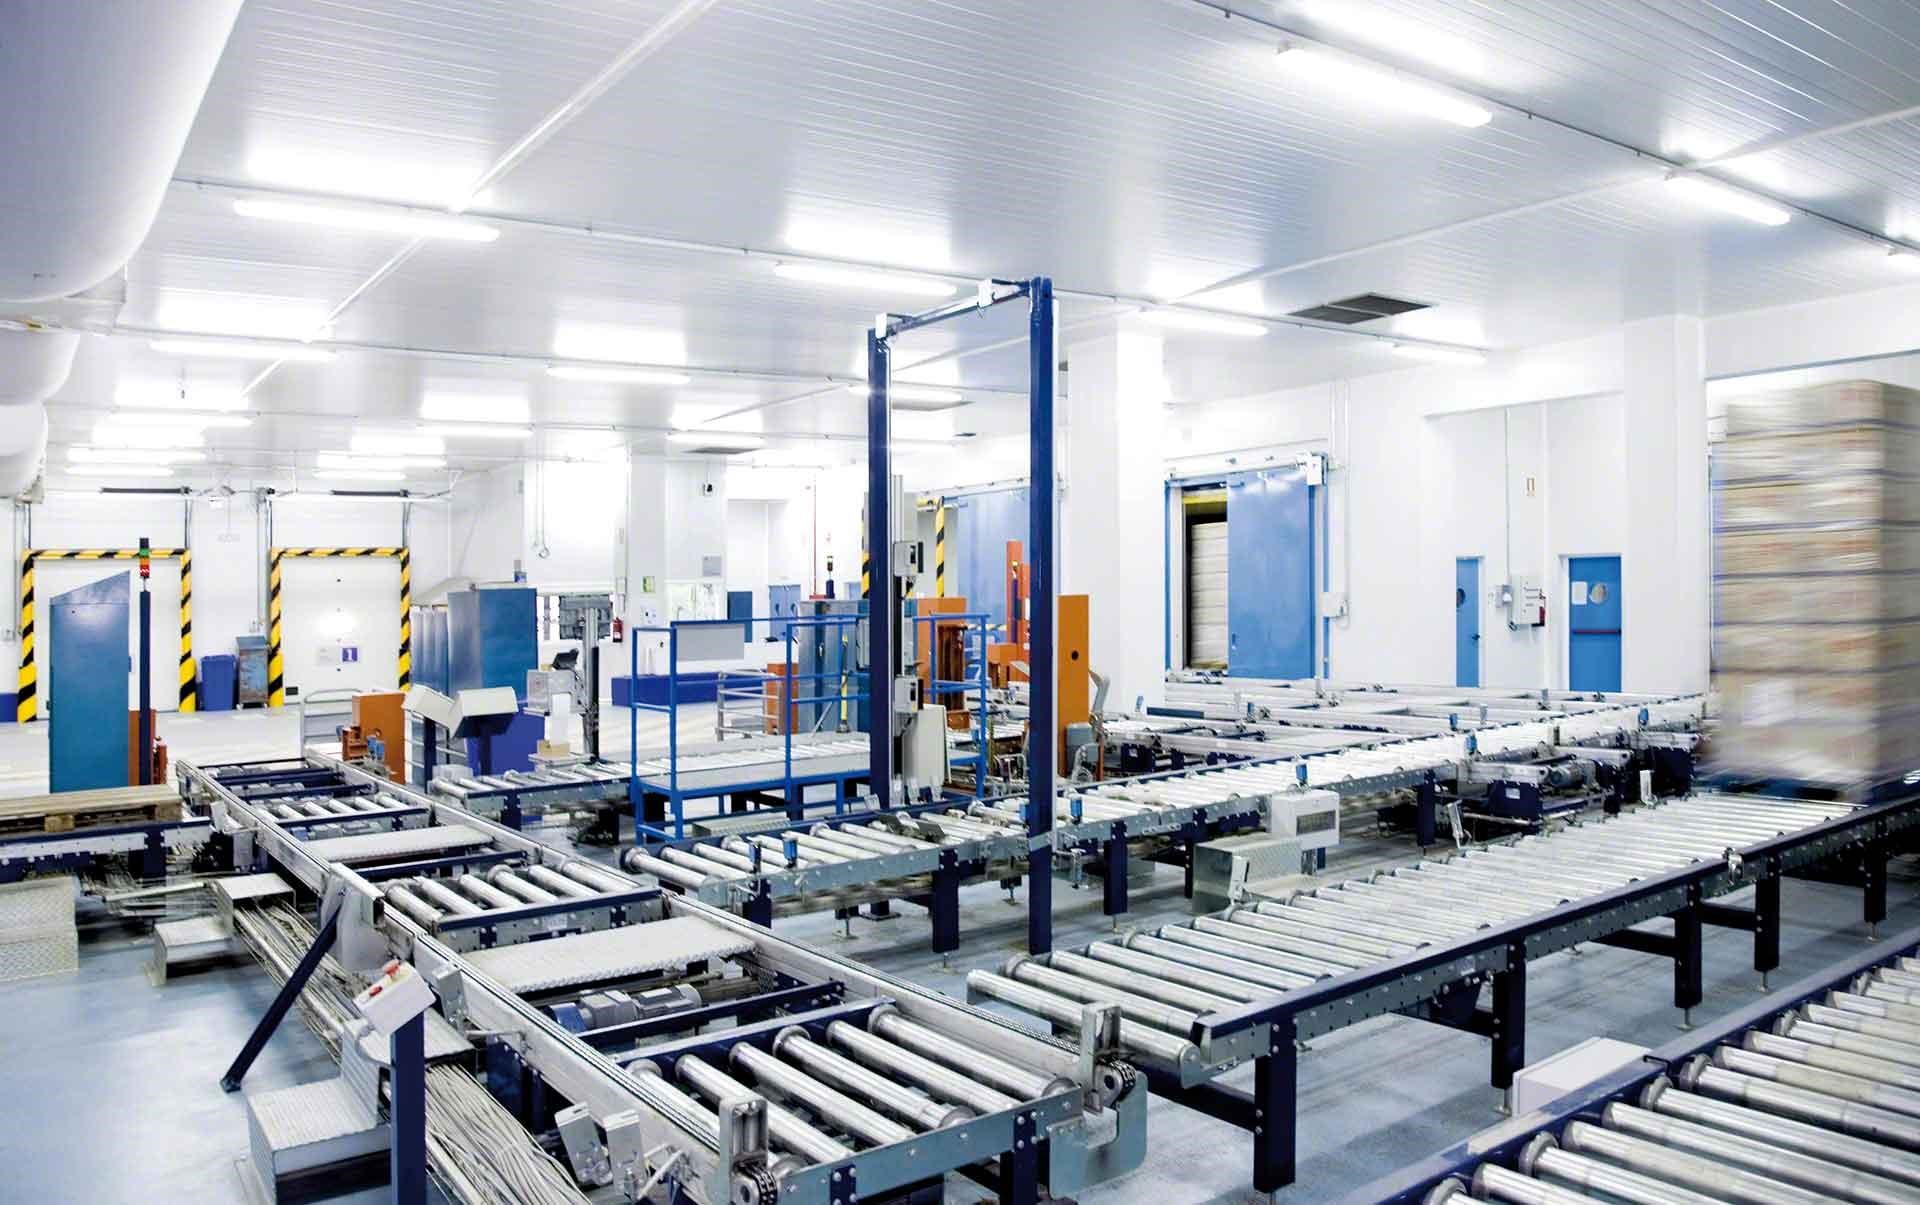 Pallet conveyors, one of the best tools for automating warehouse processes involving load movements